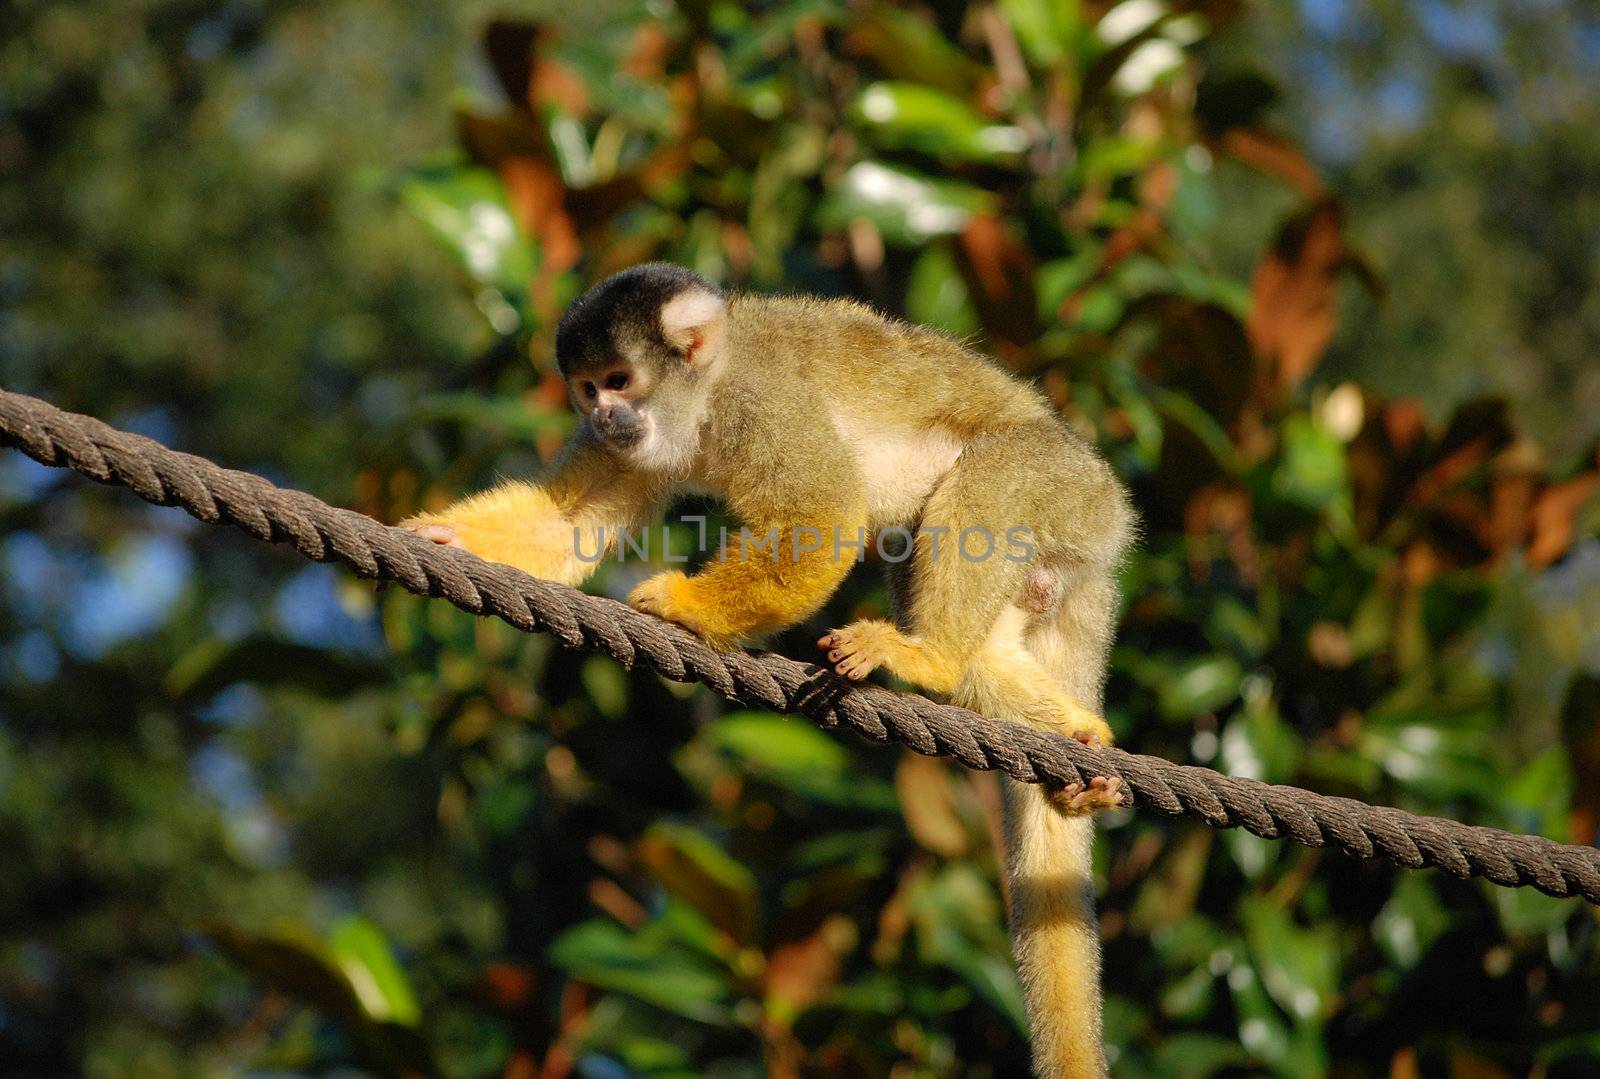 Black capped squirrel monkey walking along a rope